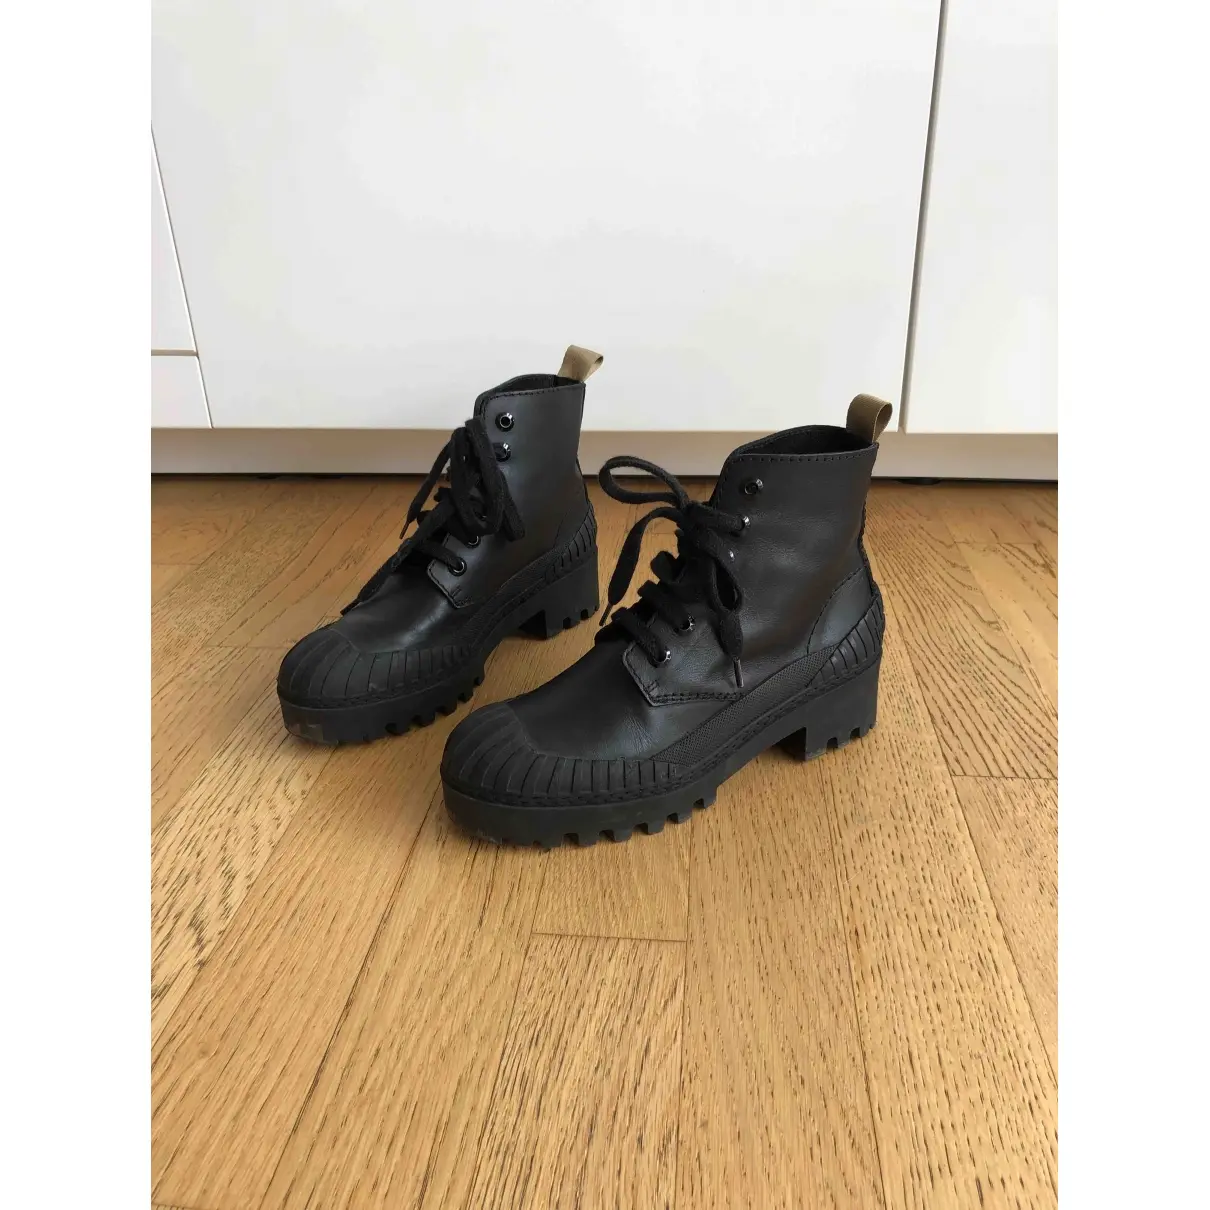 Bimba y Lola Leather lace up boots for sale